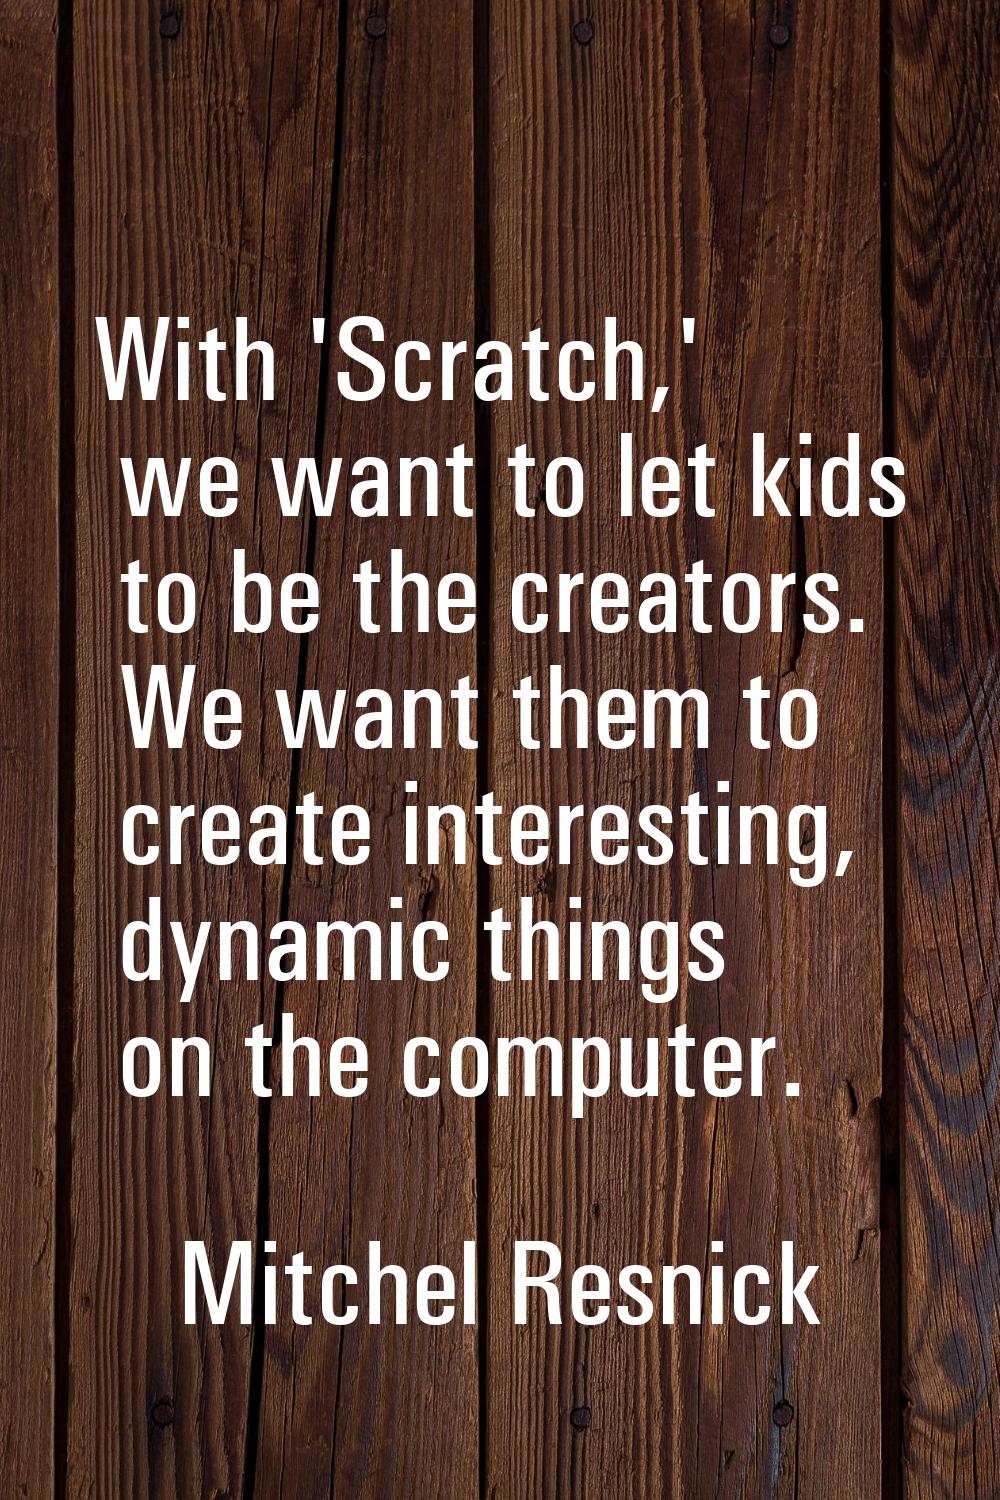 With 'Scratch,' we want to let kids to be the creators. We want them to create interesting, dynamic